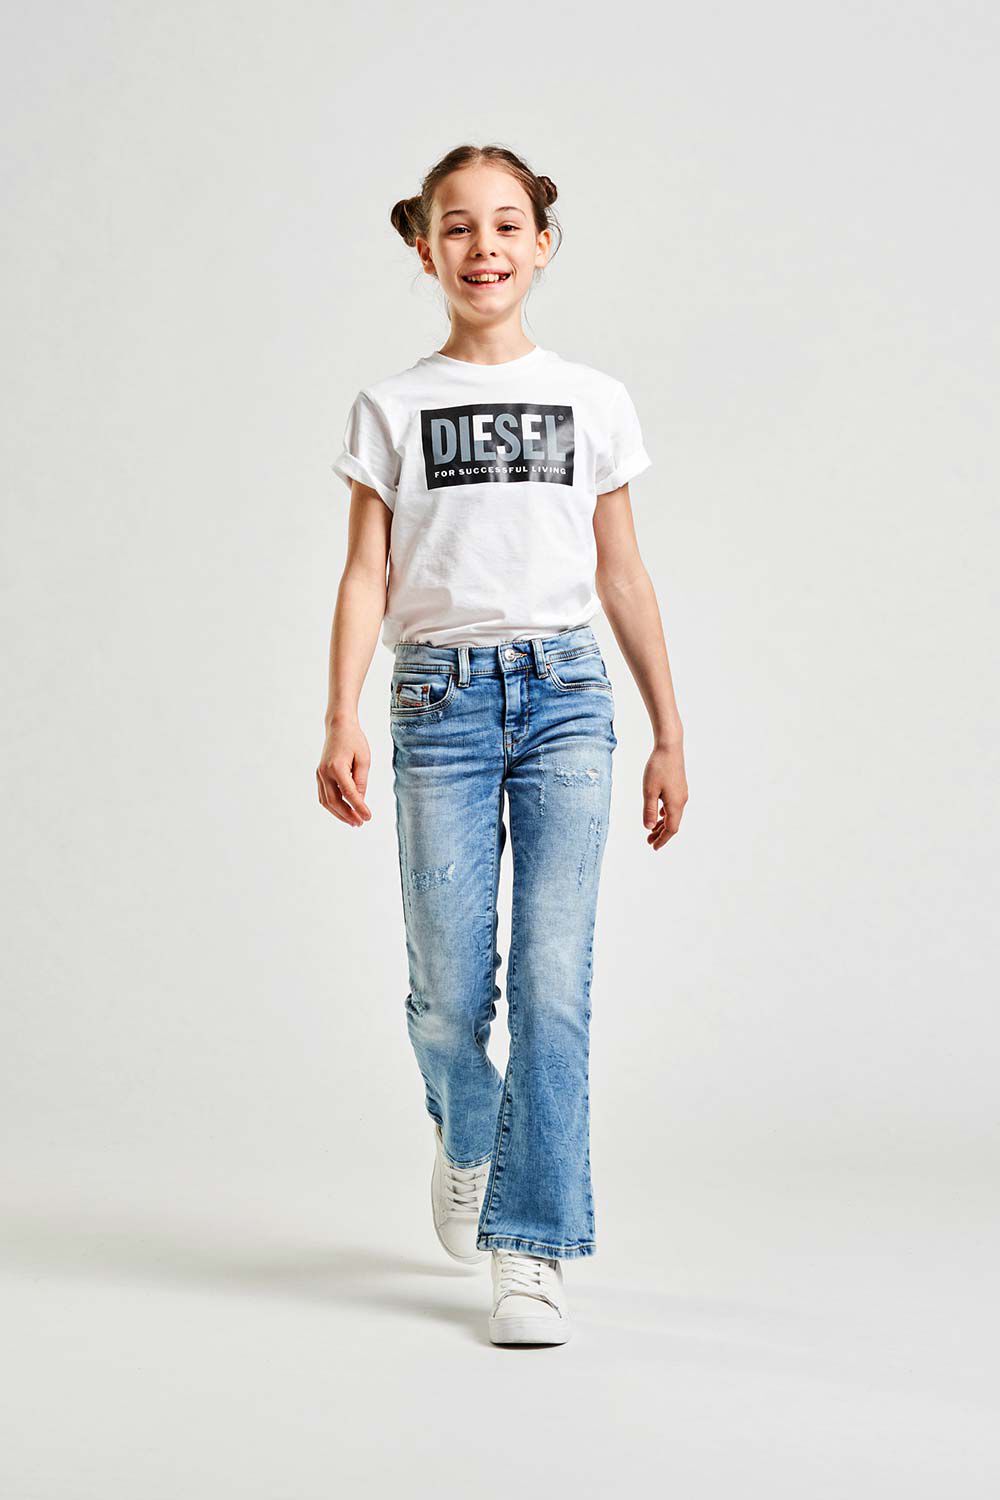 Diesel Kid Boys and Girls: Discover the collections | Diesel®